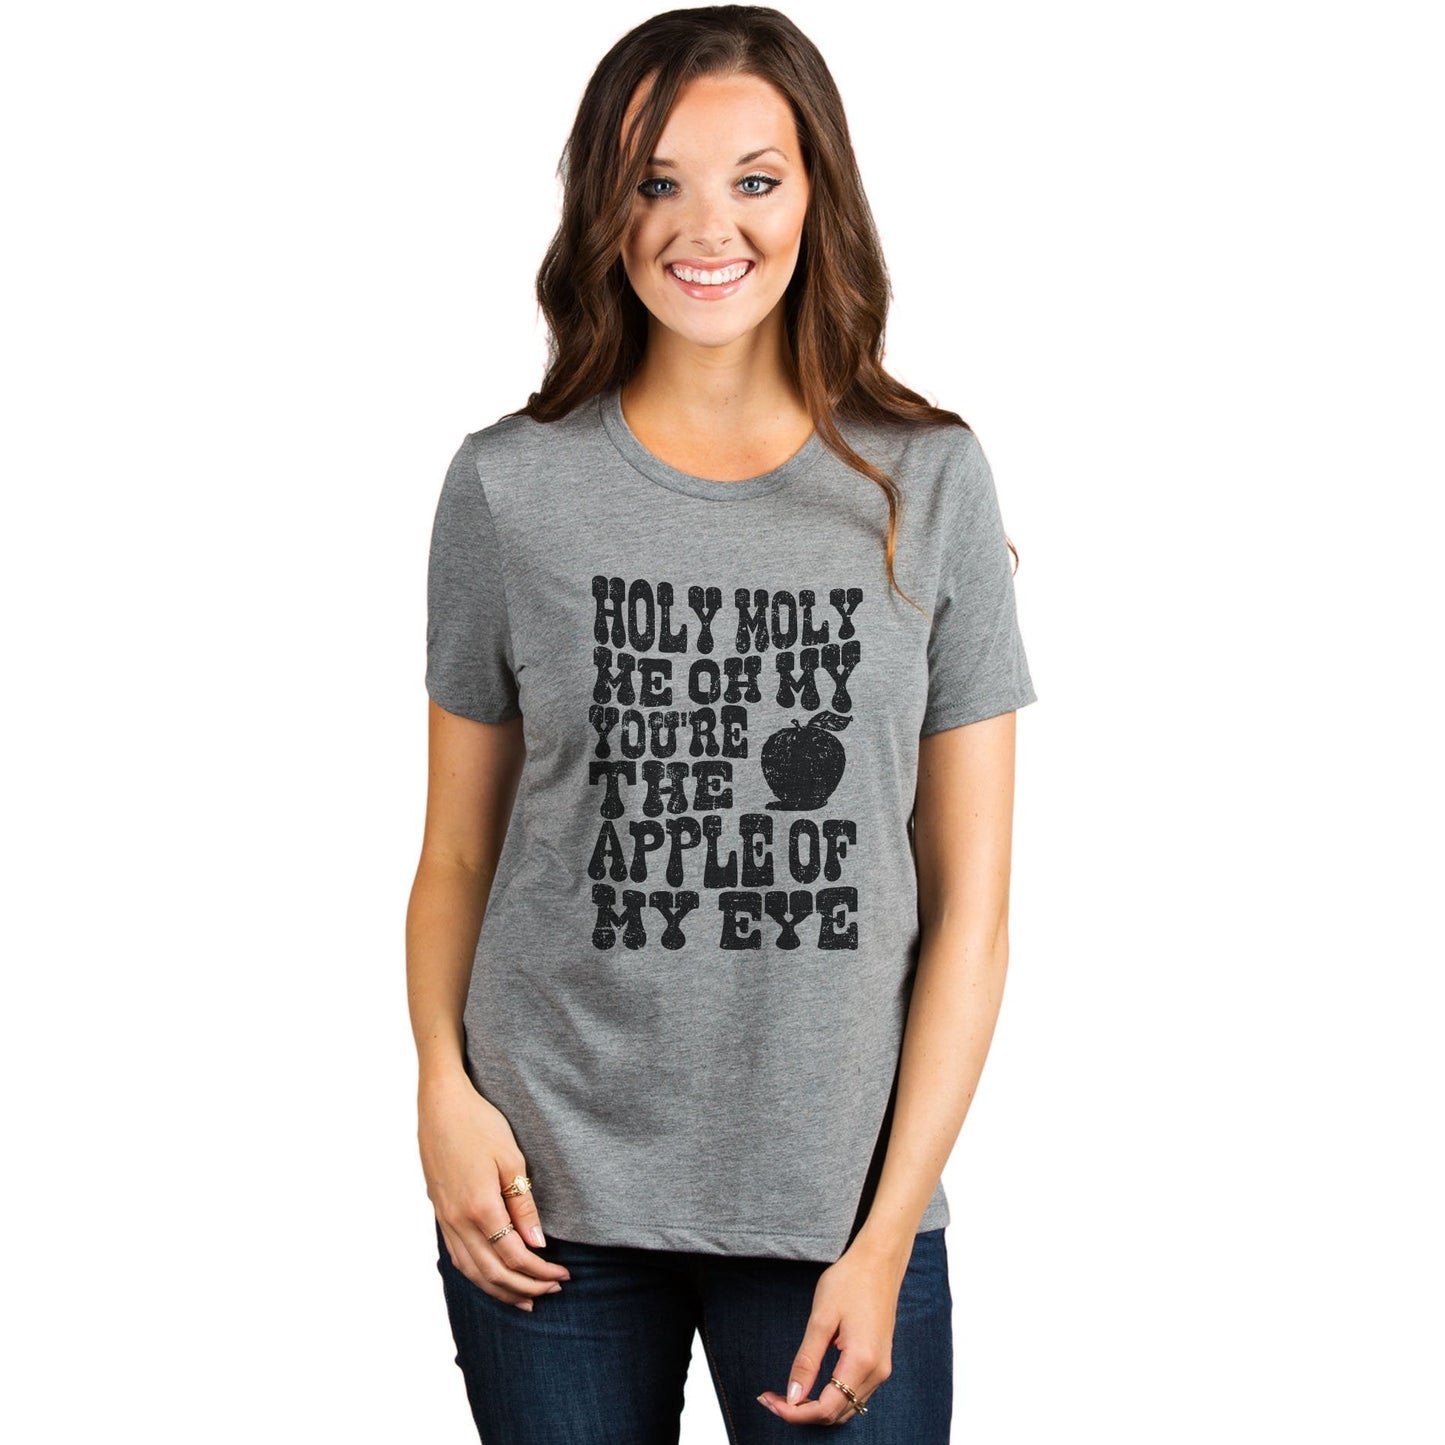 Holy Moly Me Oh My You're The Apple Of My Eye Women's Relaxed Crewneck T-Shirt Top Tee Heather Grey Model
